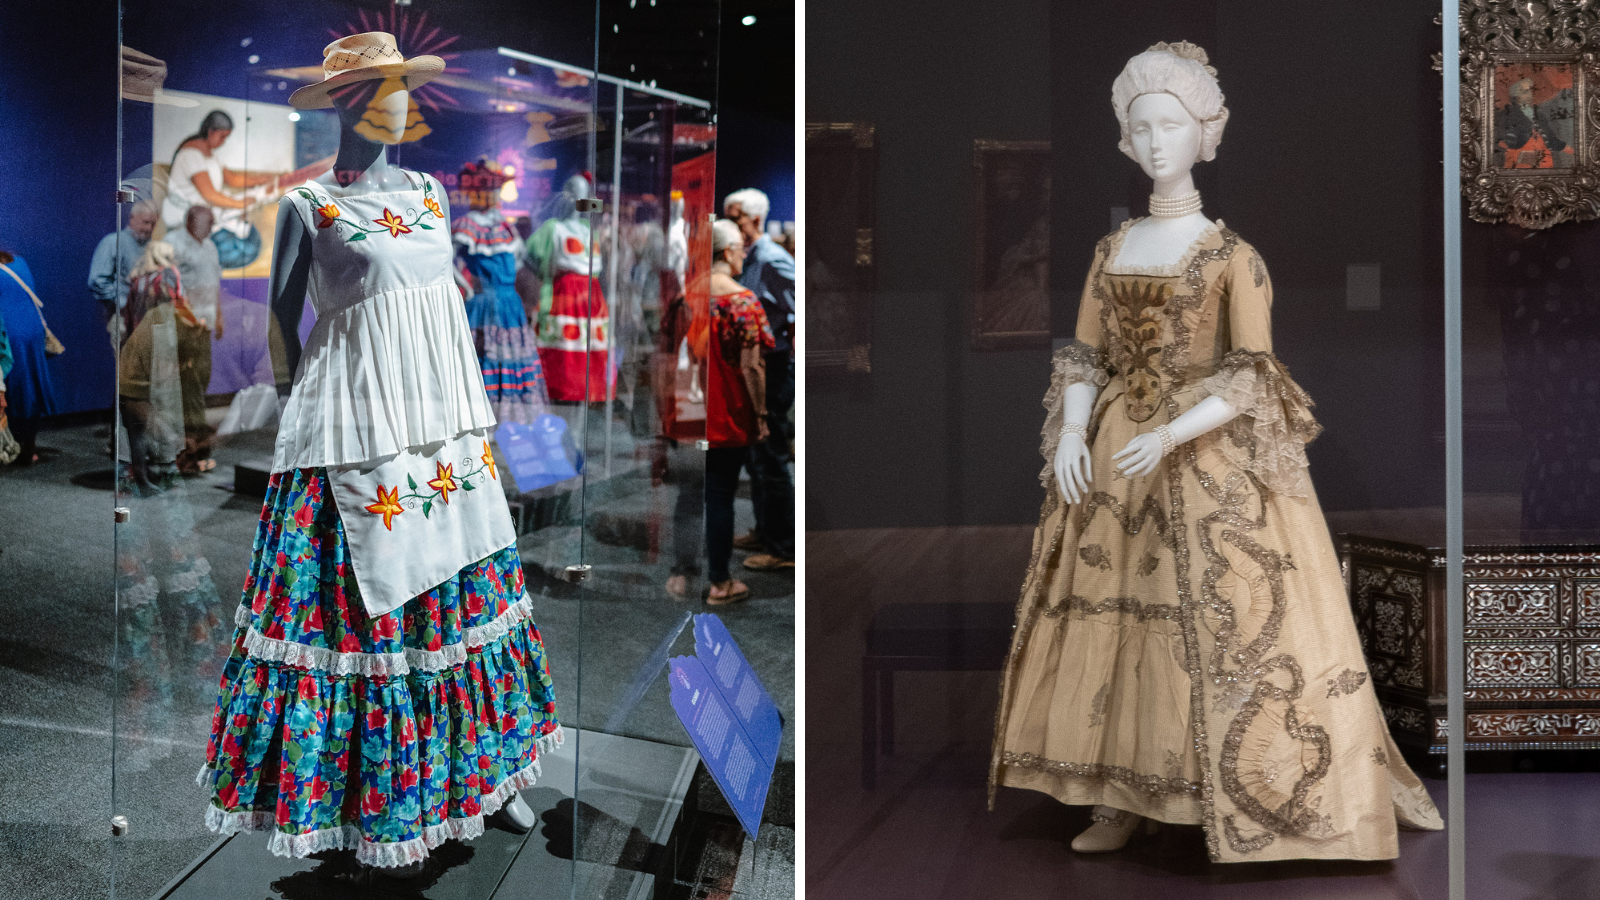 Two images, one of a mannequin wearing a frilly traditional Mexican dress and a hat; the other of a mannequin wearing an ornate 18th-century dress